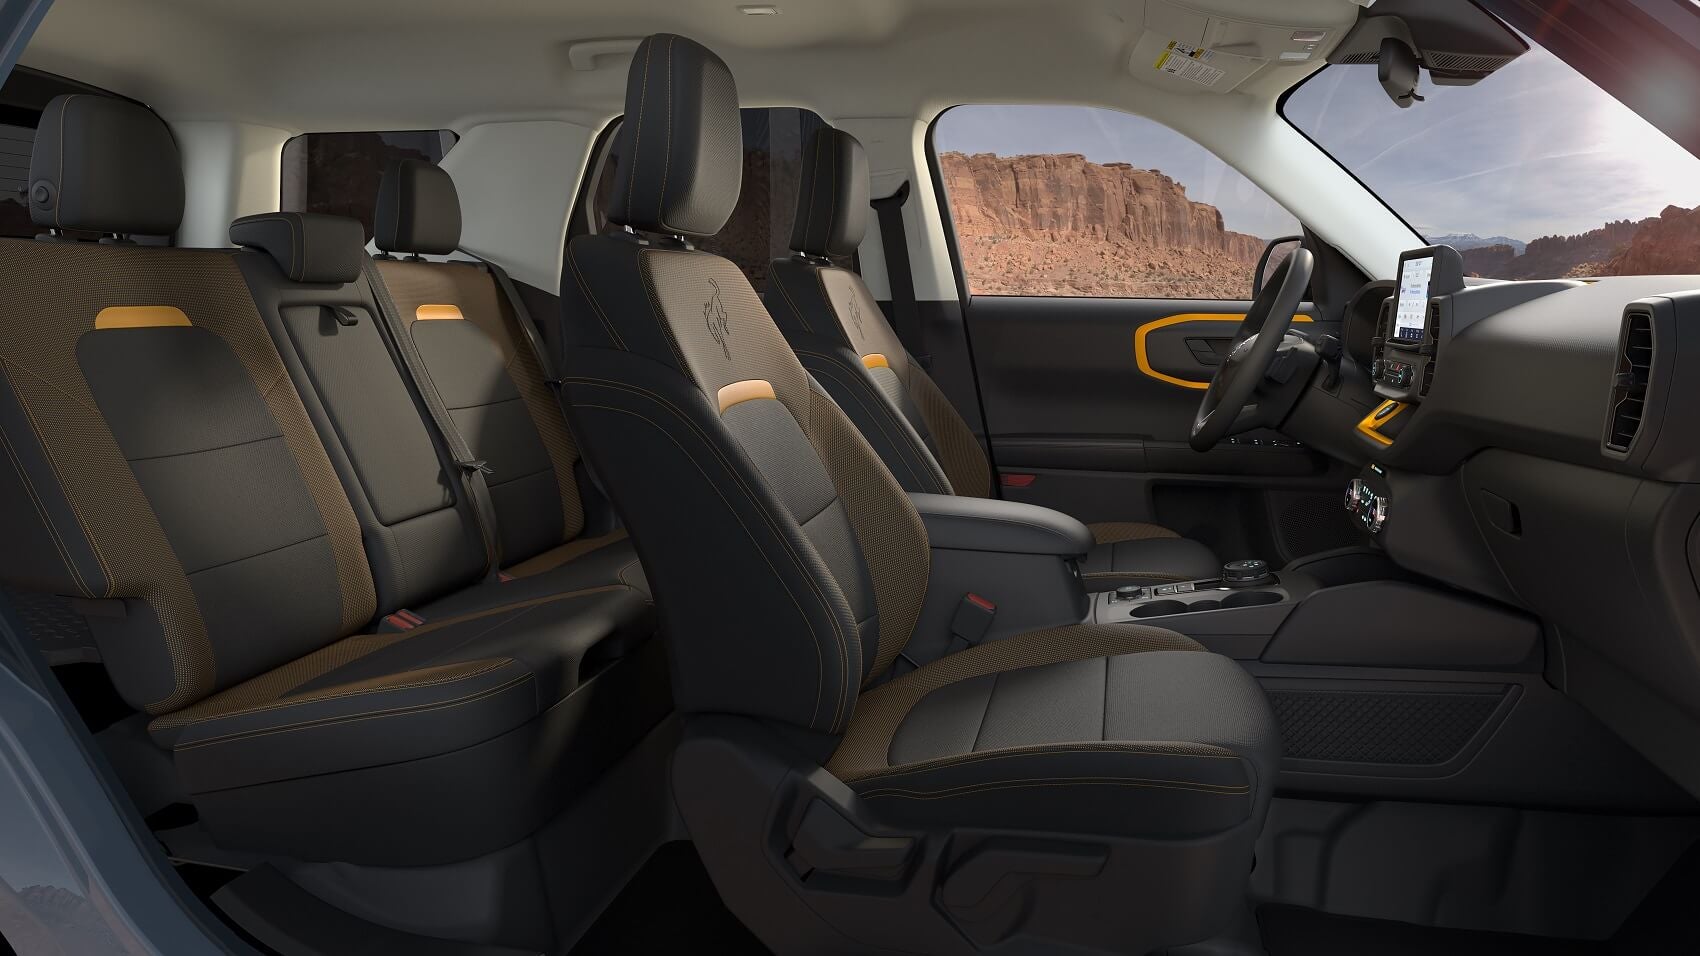 Go the Distance in an Exceptional Interior